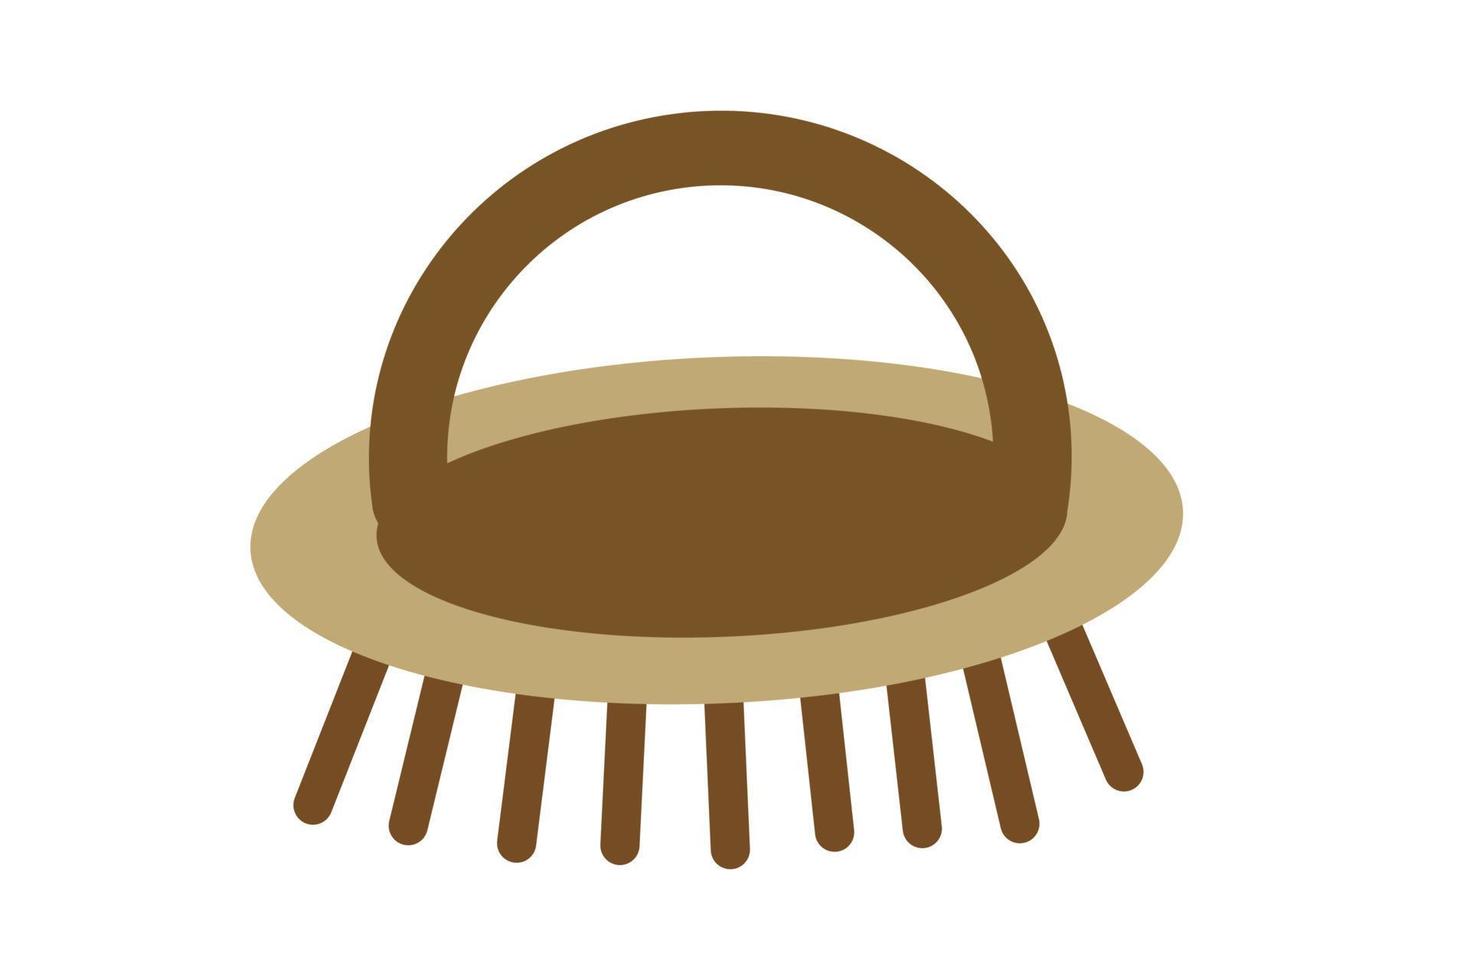 Brush for combing dog or cat hair. Accessories for pets. Shop concept. vector